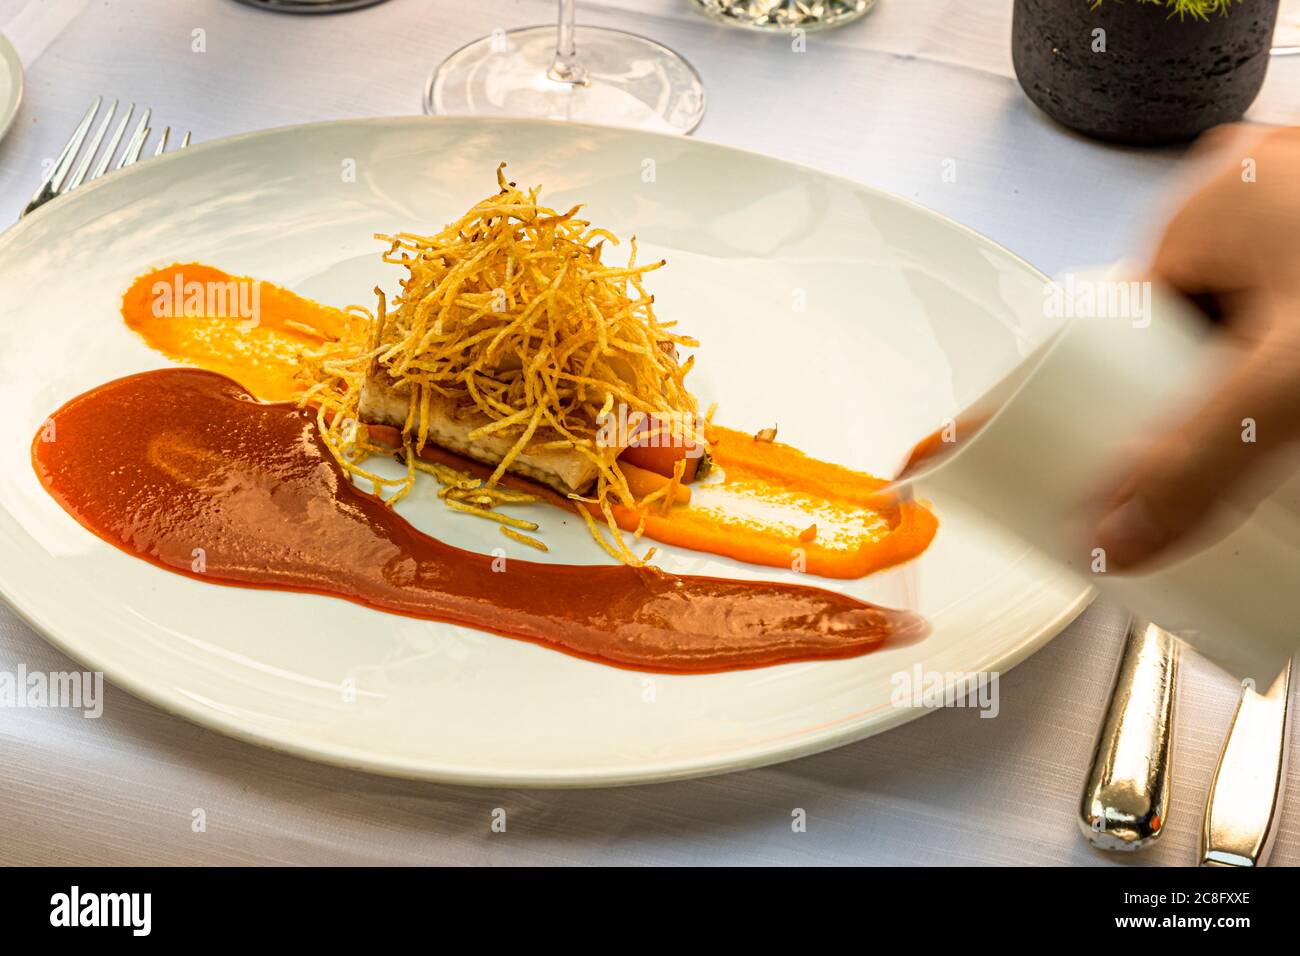 Gourmet Dish by Hotel Krone Chef de cuisine Peter Prüfer in Weil am Rhein, Germany. Fillet of 'Wiße Waller' with young carrots, crab broth and potato straw Stock Photo